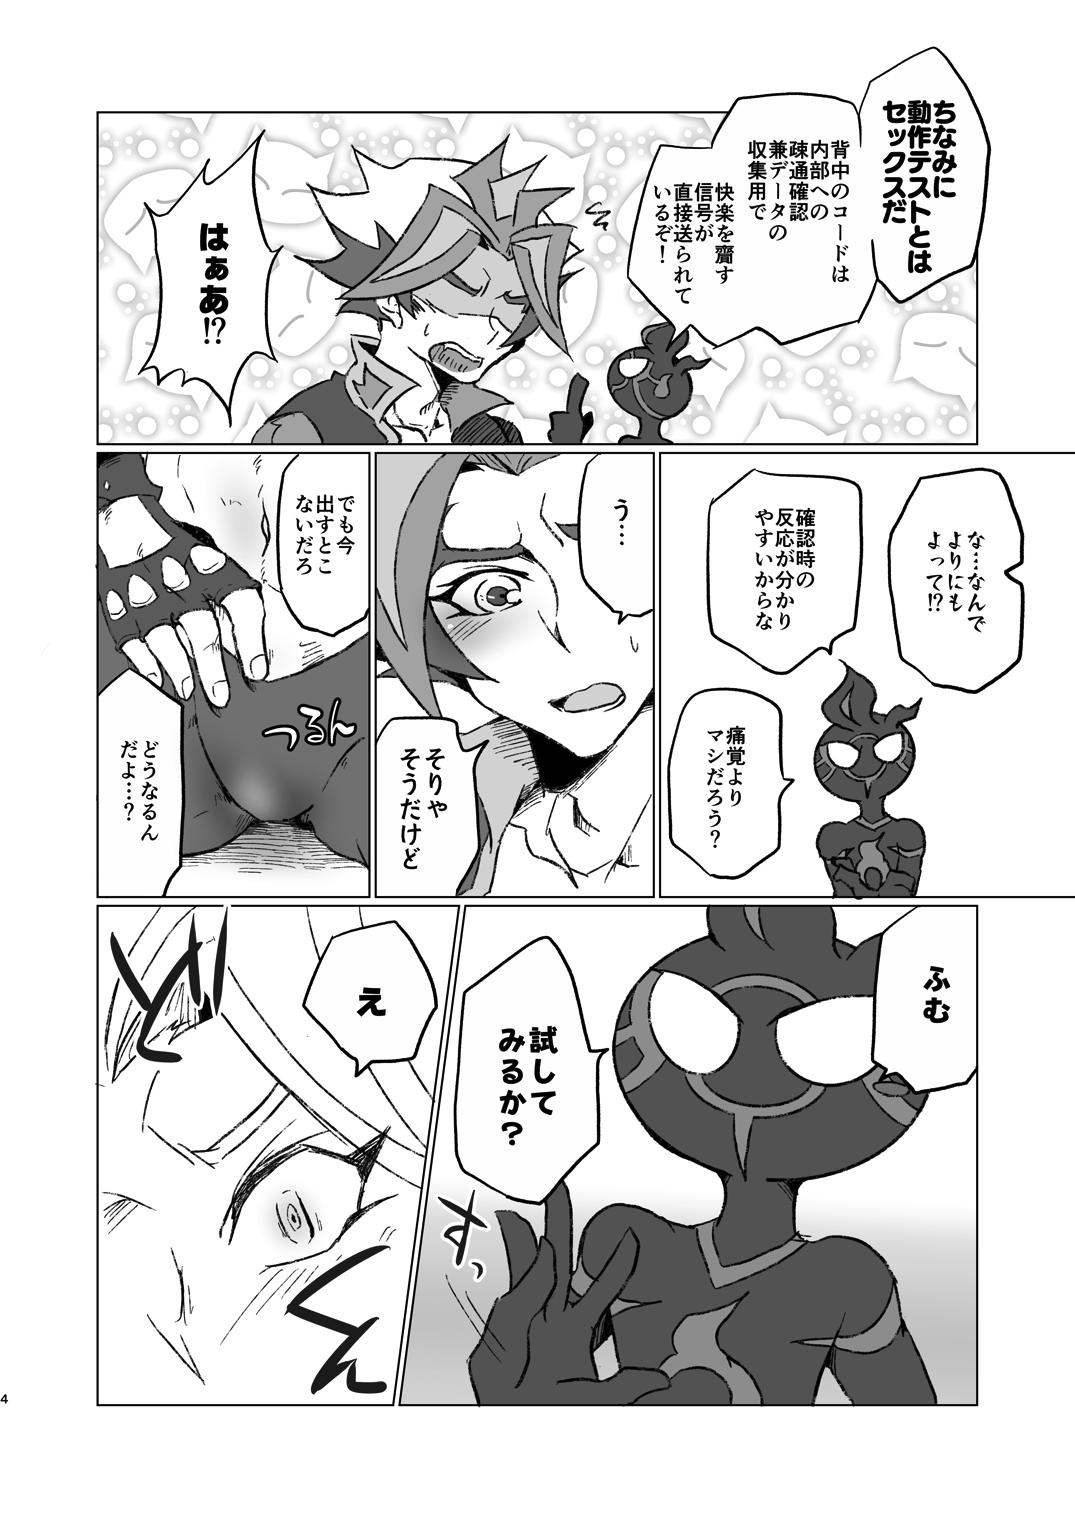 Wild Amateurs A little bit further - Yu-gi-oh vrains Blowjobs - Page 3